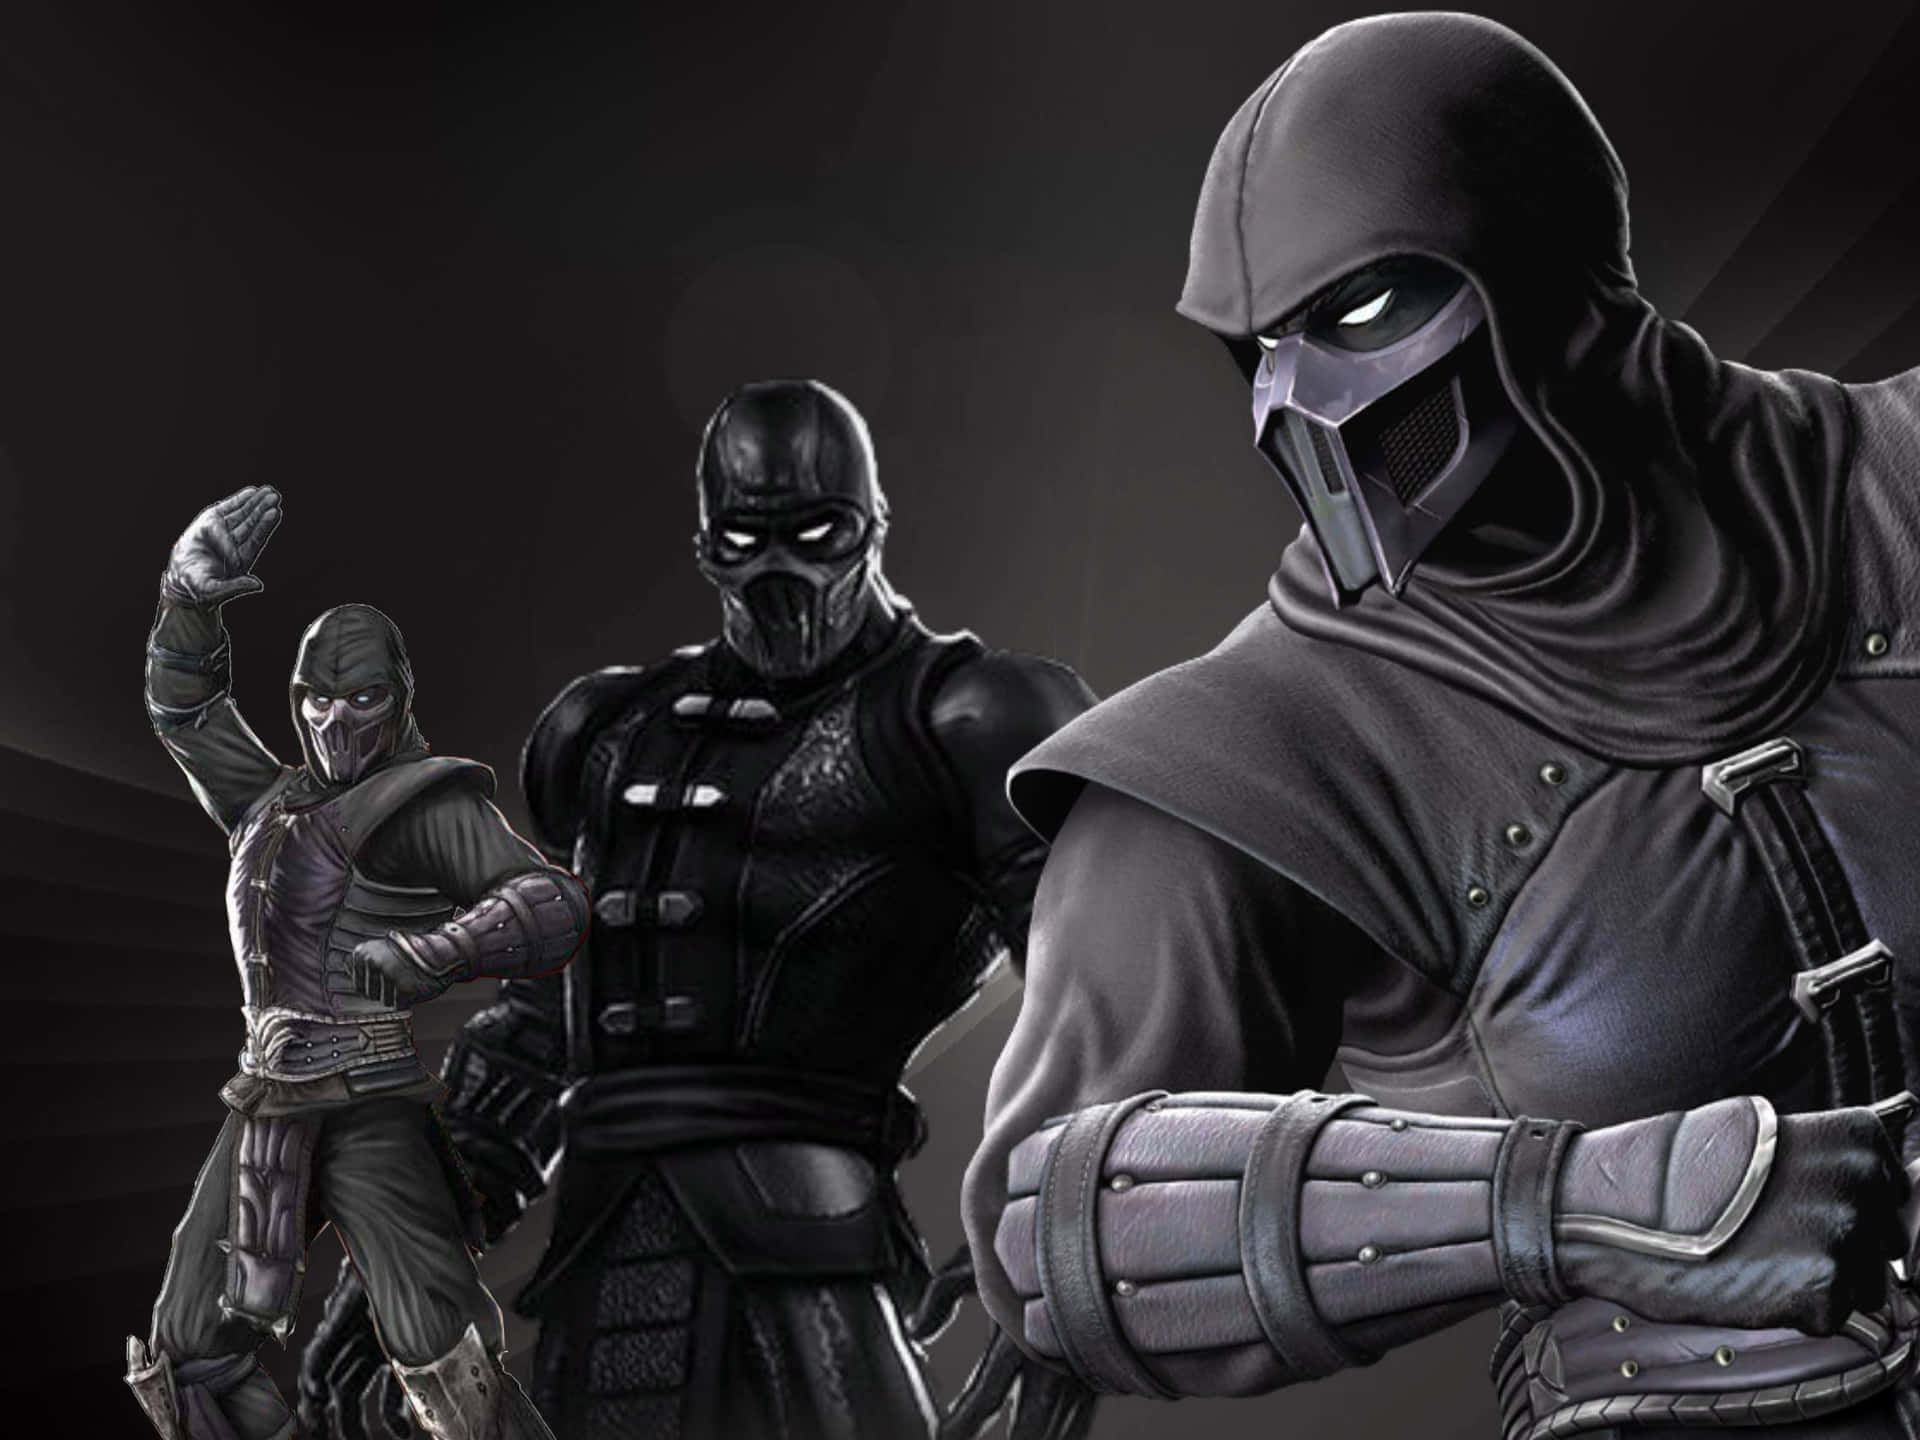 Staring down his opponent, Noob Saibot is ready to take them on. Wallpaper